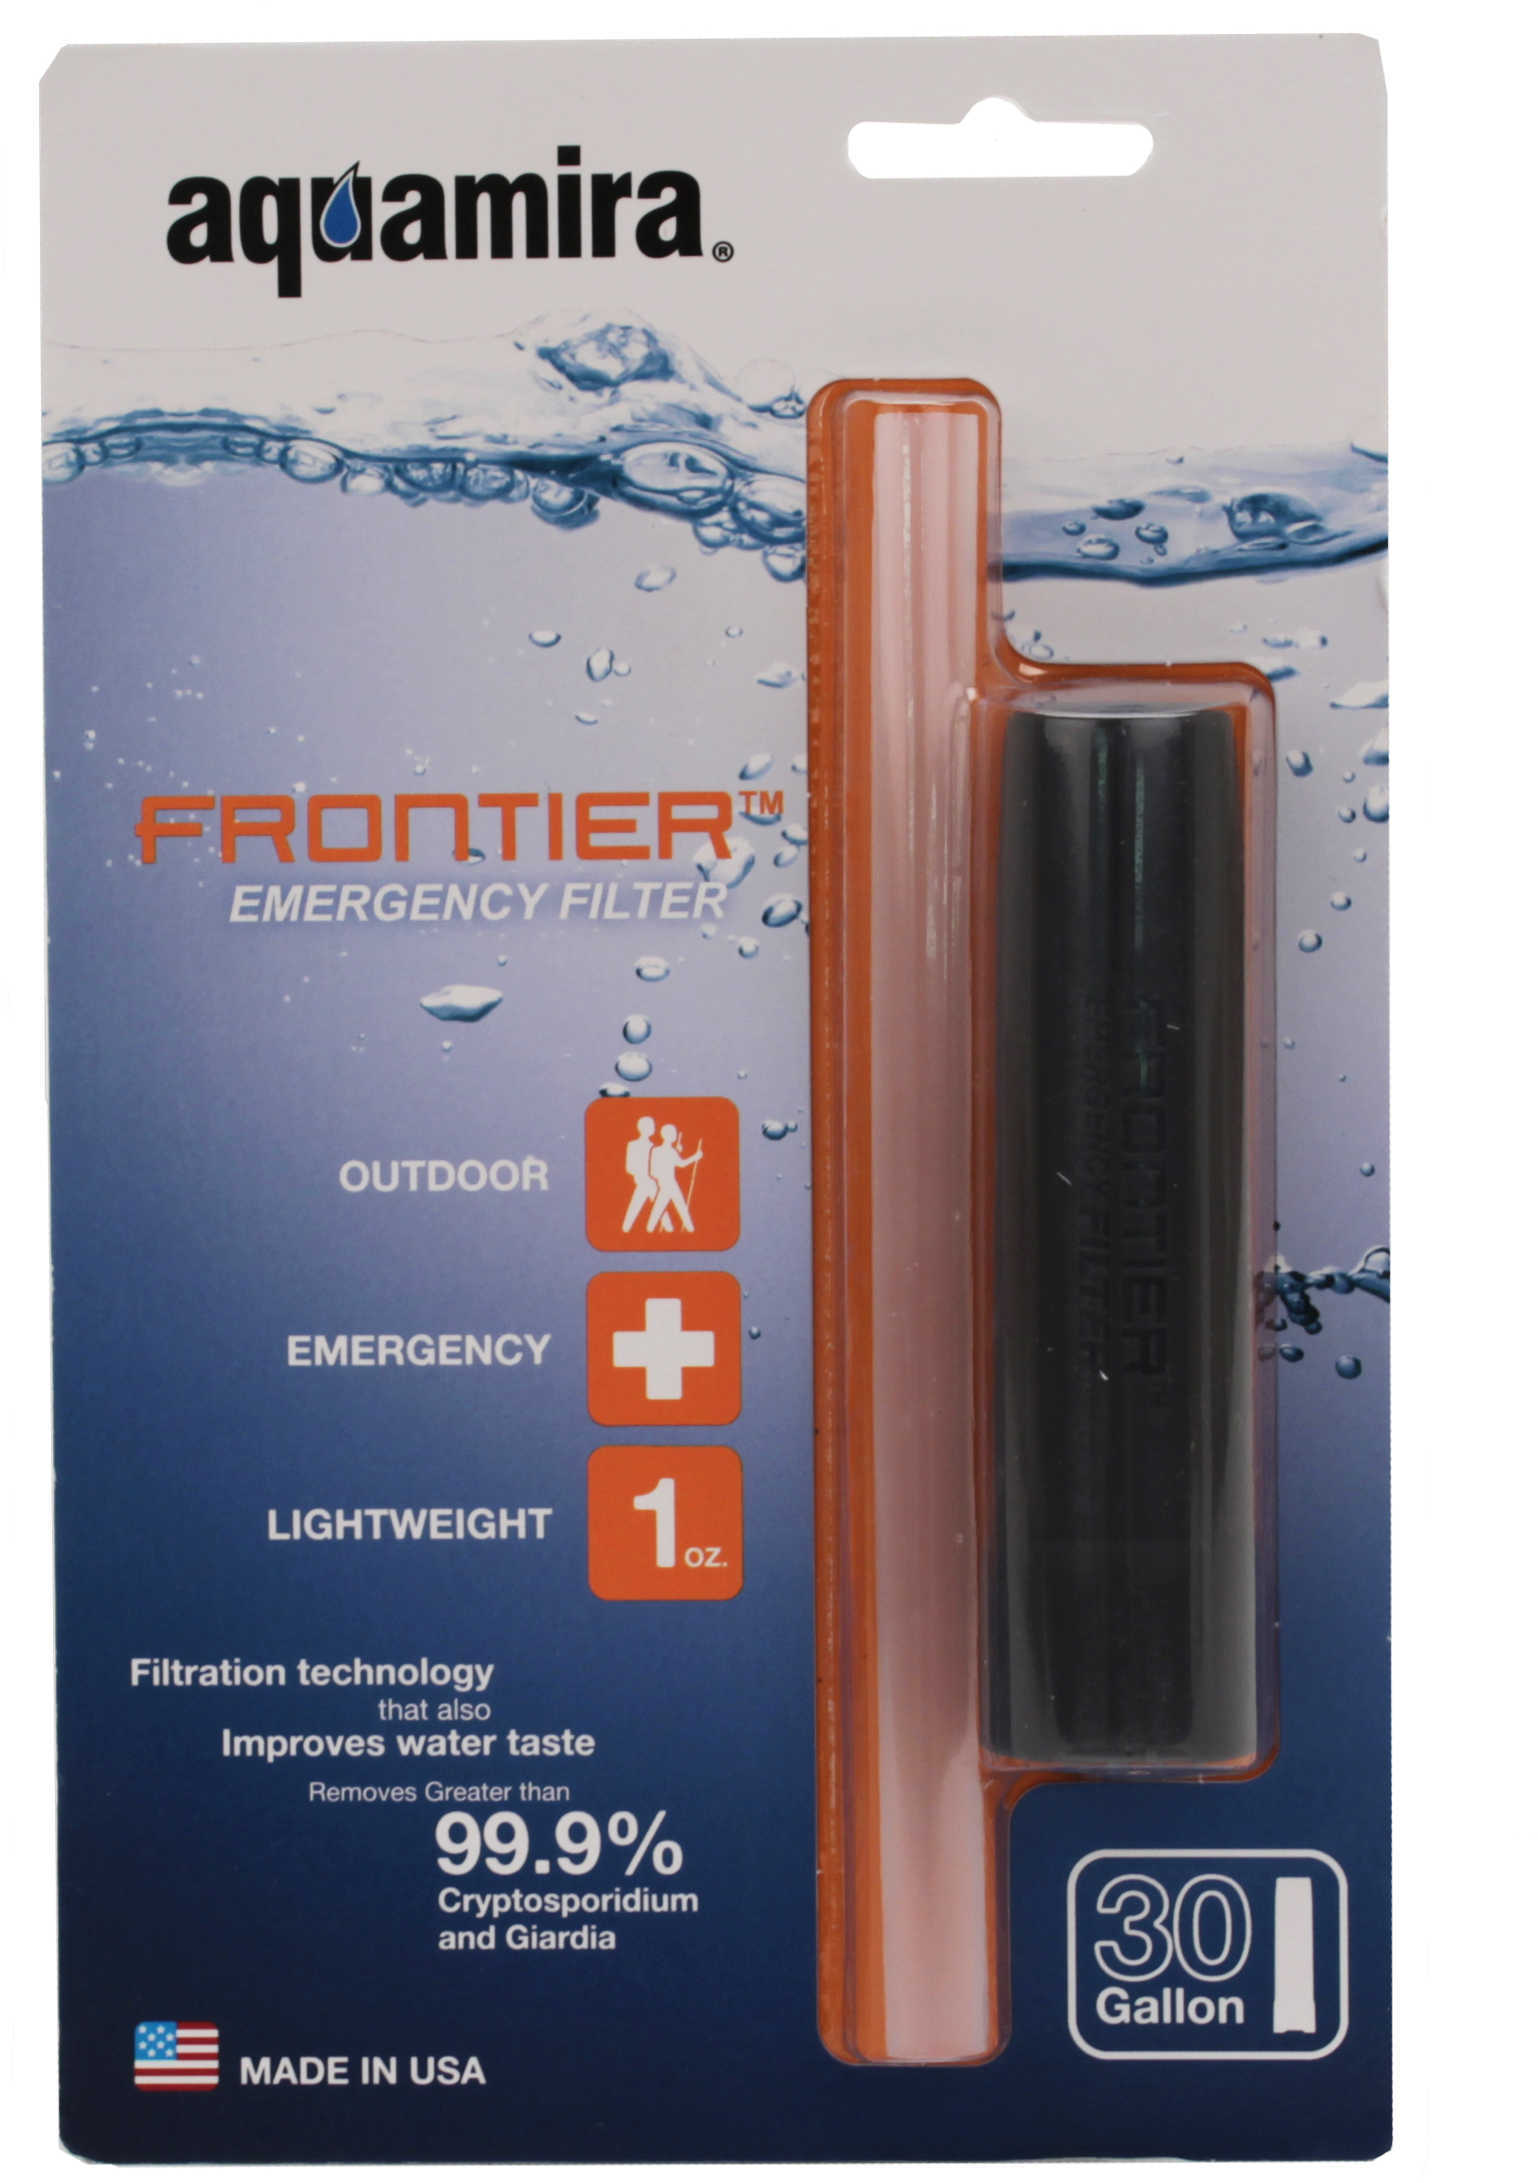 Aquamira Frontier Filter Emergency Water System Filters Up to 20 Gallons of 67005